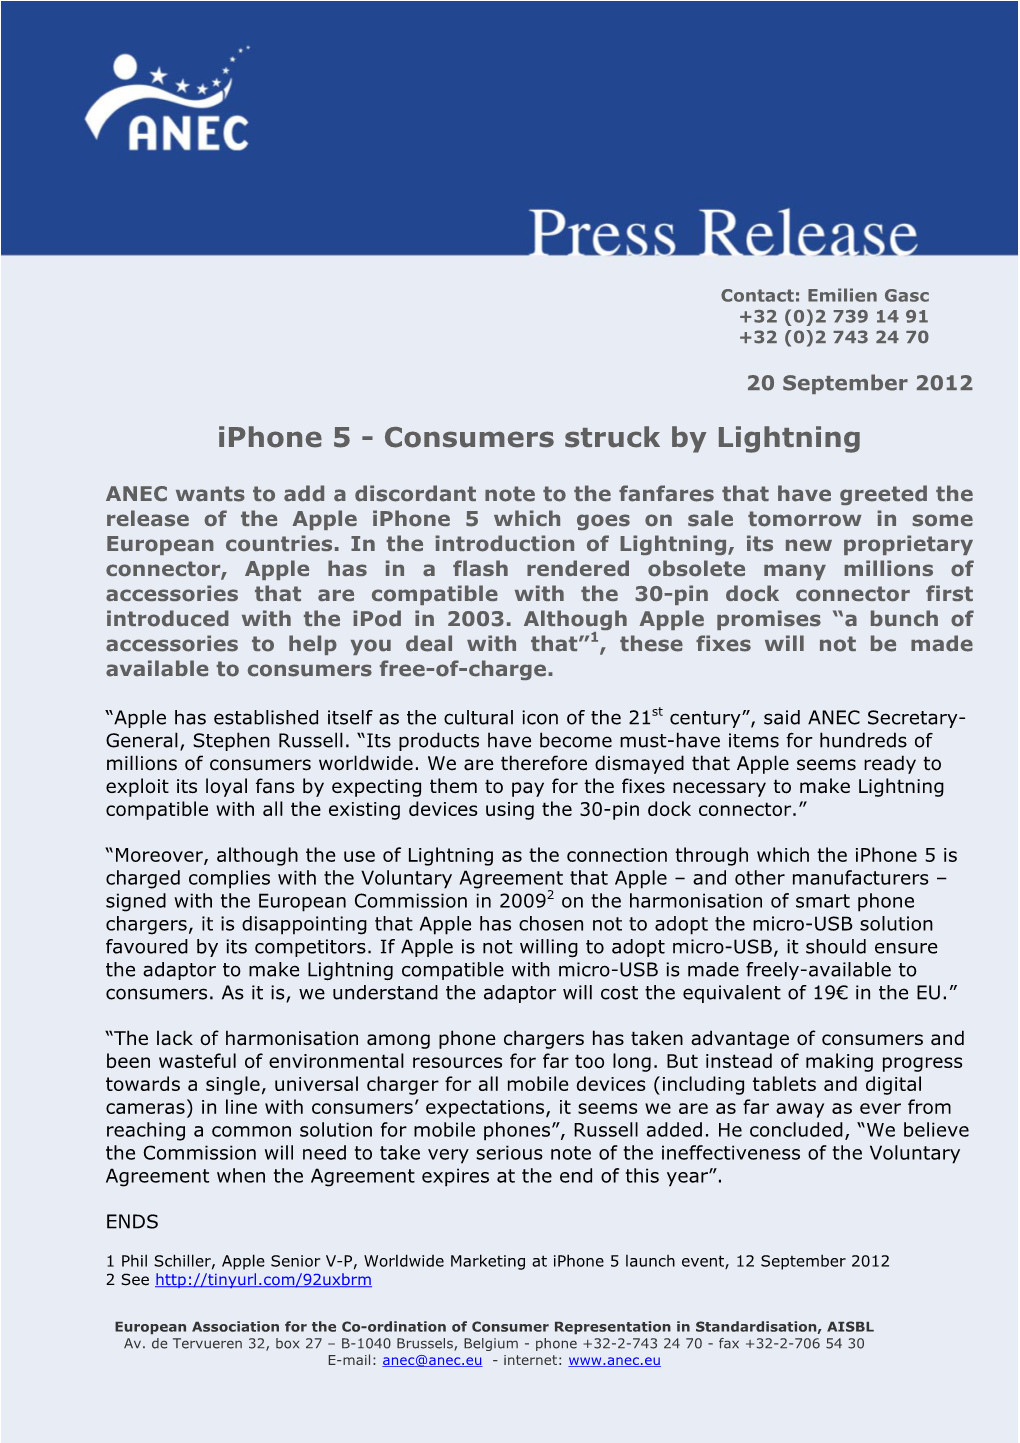 Iphone 5 - Consumers Struck by Lightning